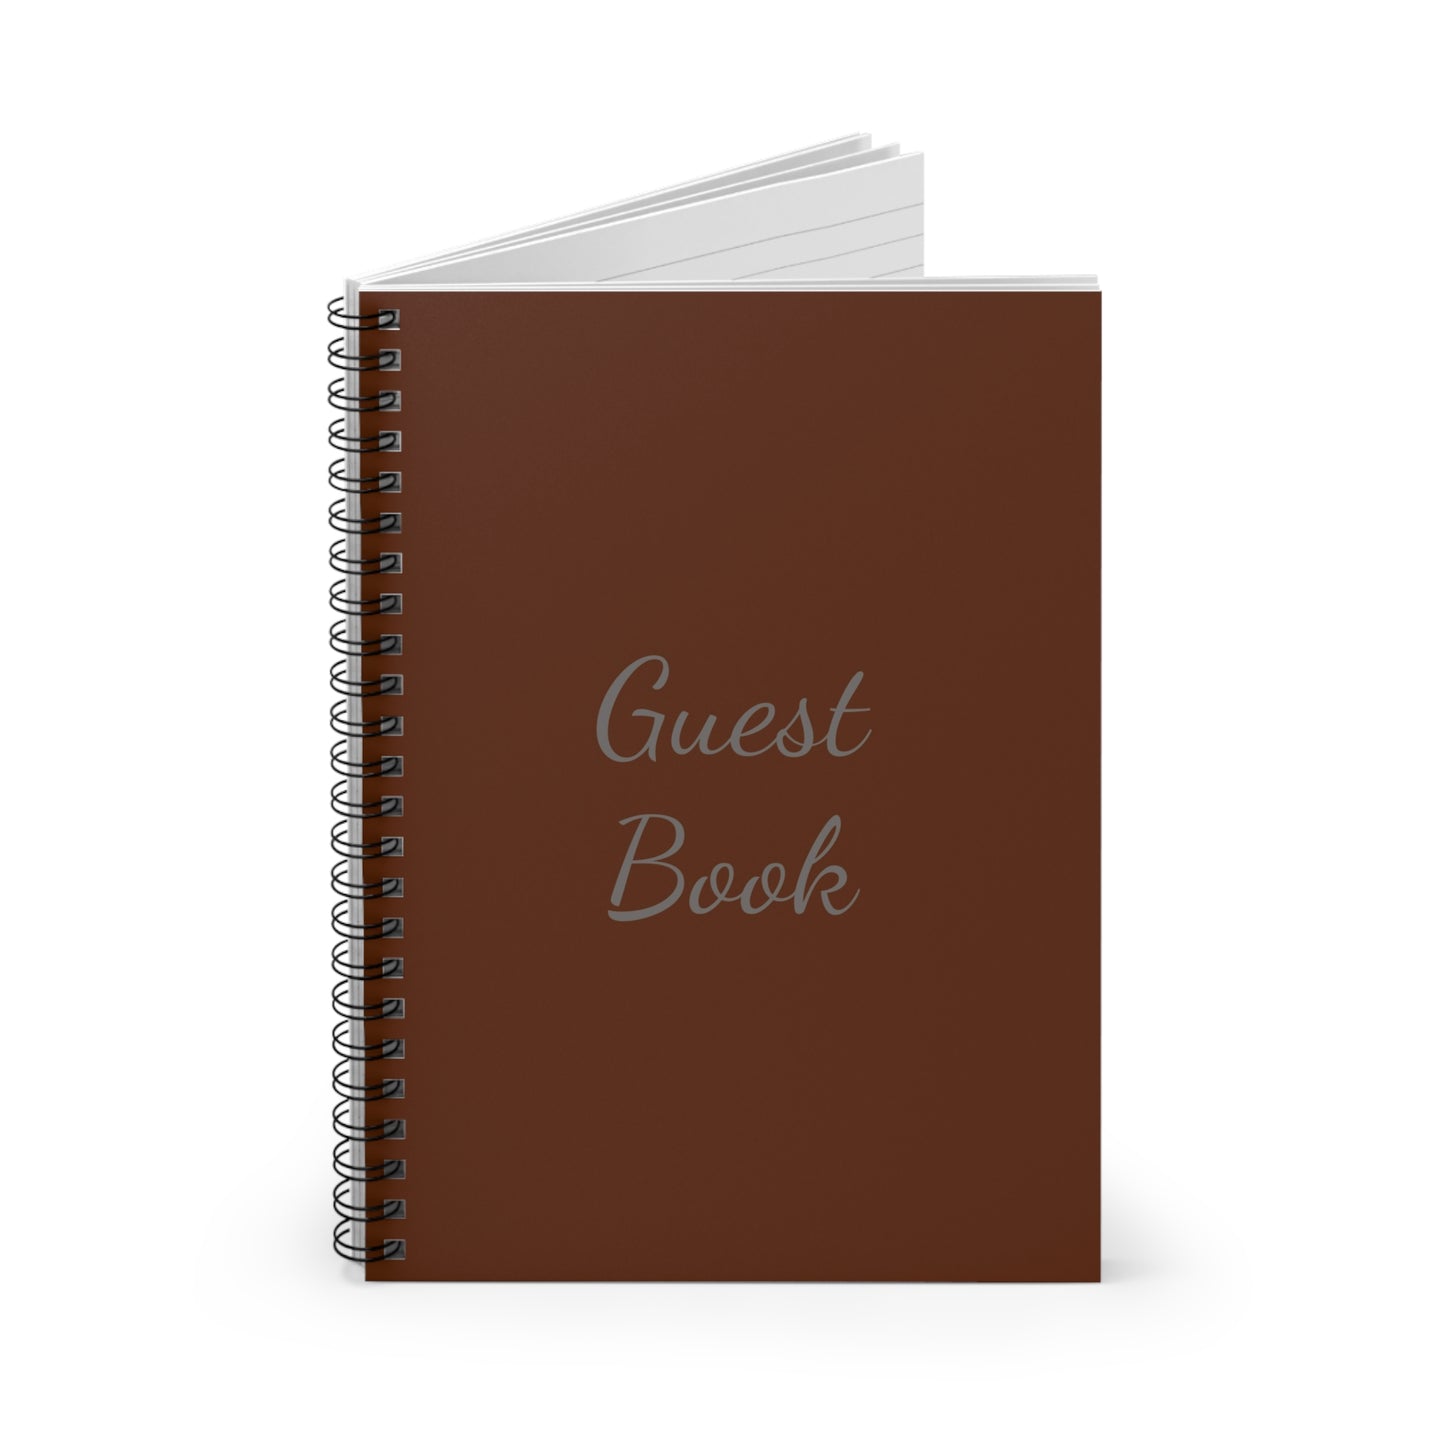 An American-made, brown Printify spiral-bound guest book for wedding receptions with blank pages standing upright against a white background.